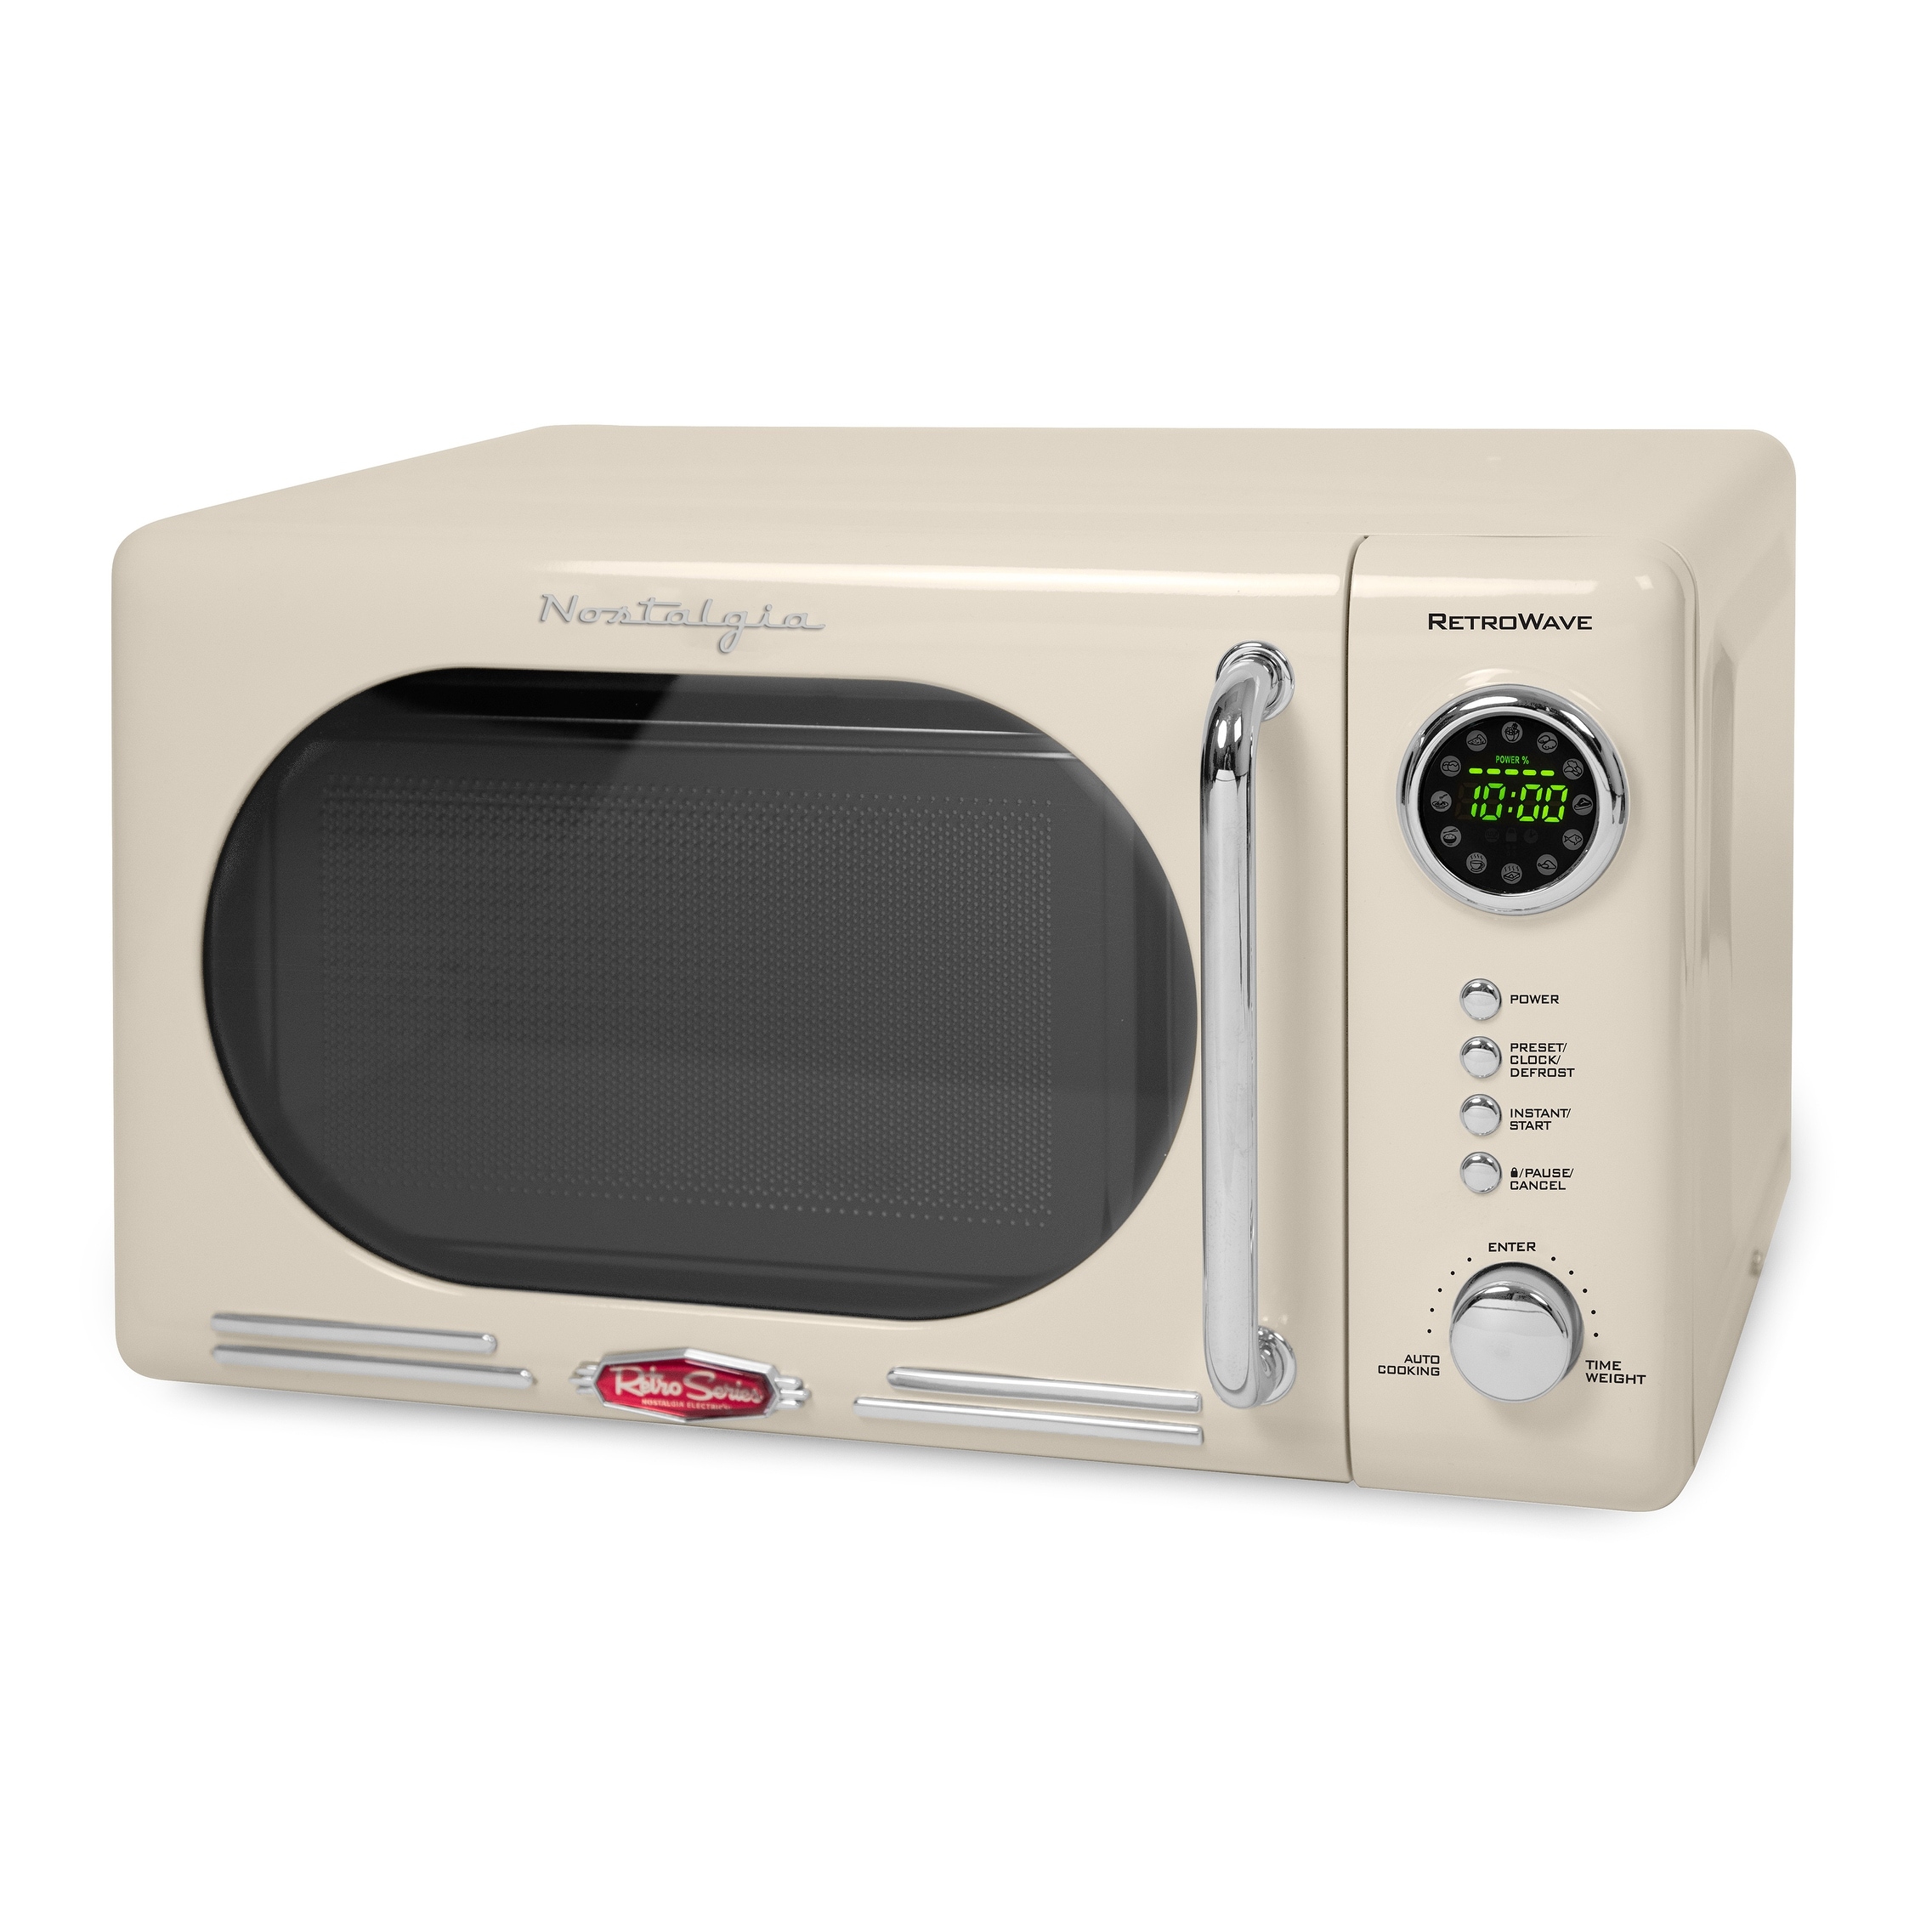  Cuisinart CMW-100 1-Cubic-Foot Stainless Steel Microwave Oven,  Brushed Chrome: Countertop Microwave Ovens: Home & Kitchen